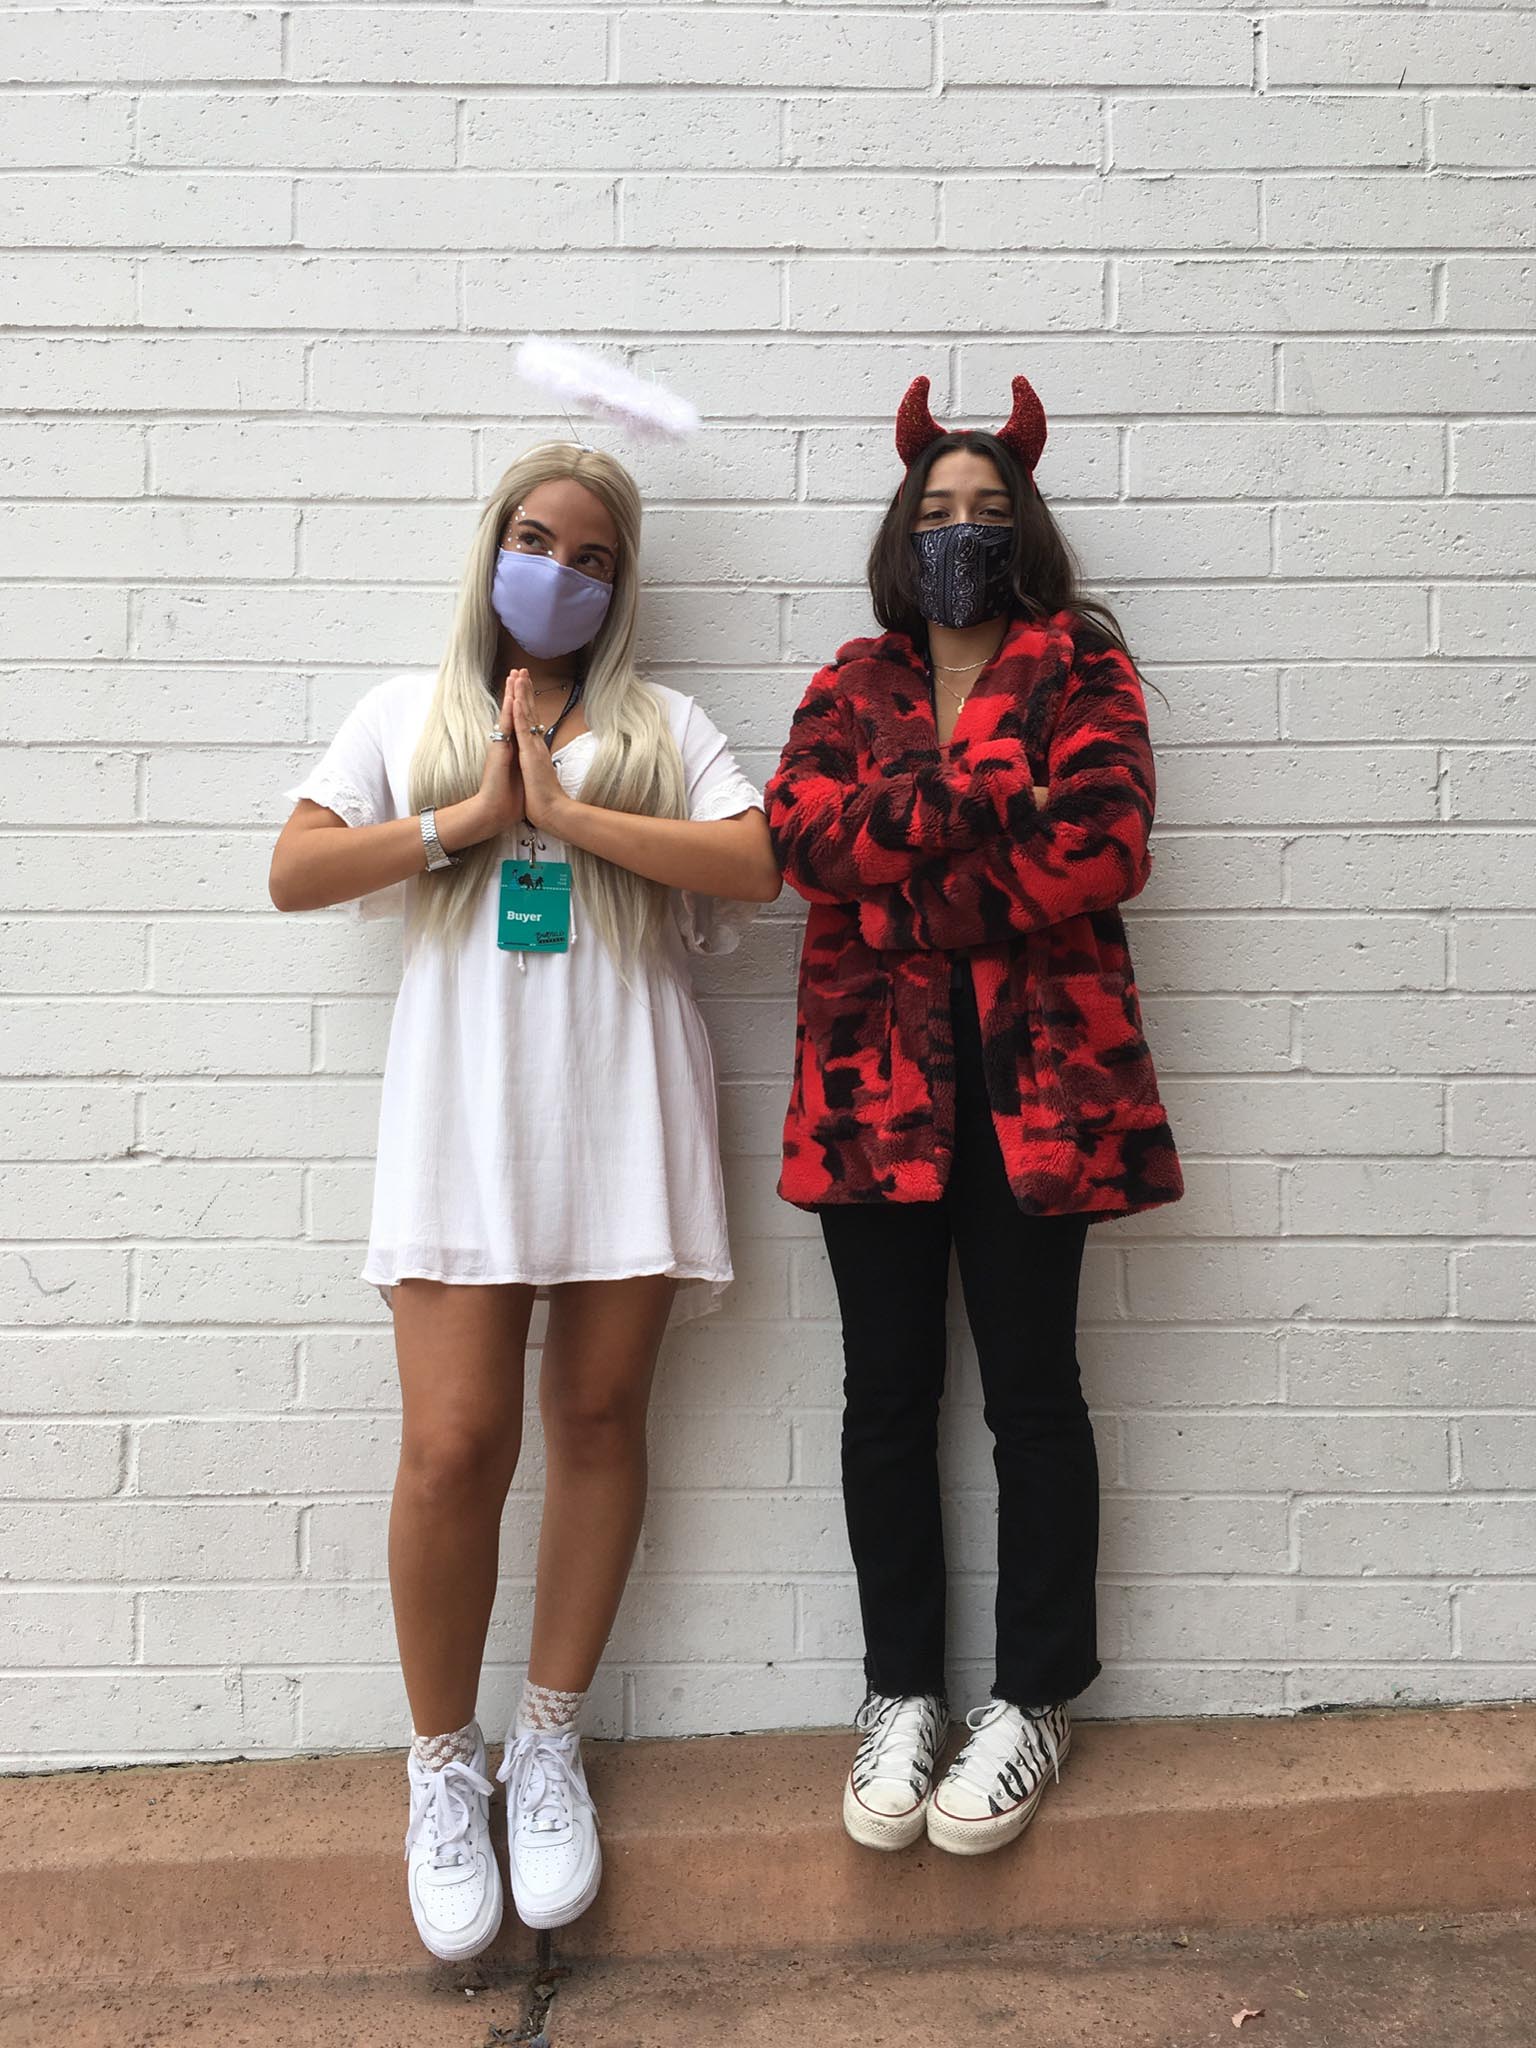 2 People Wearing Angel Costume of white mini dress and halo and devil costume of red camo faux fur coat and horns